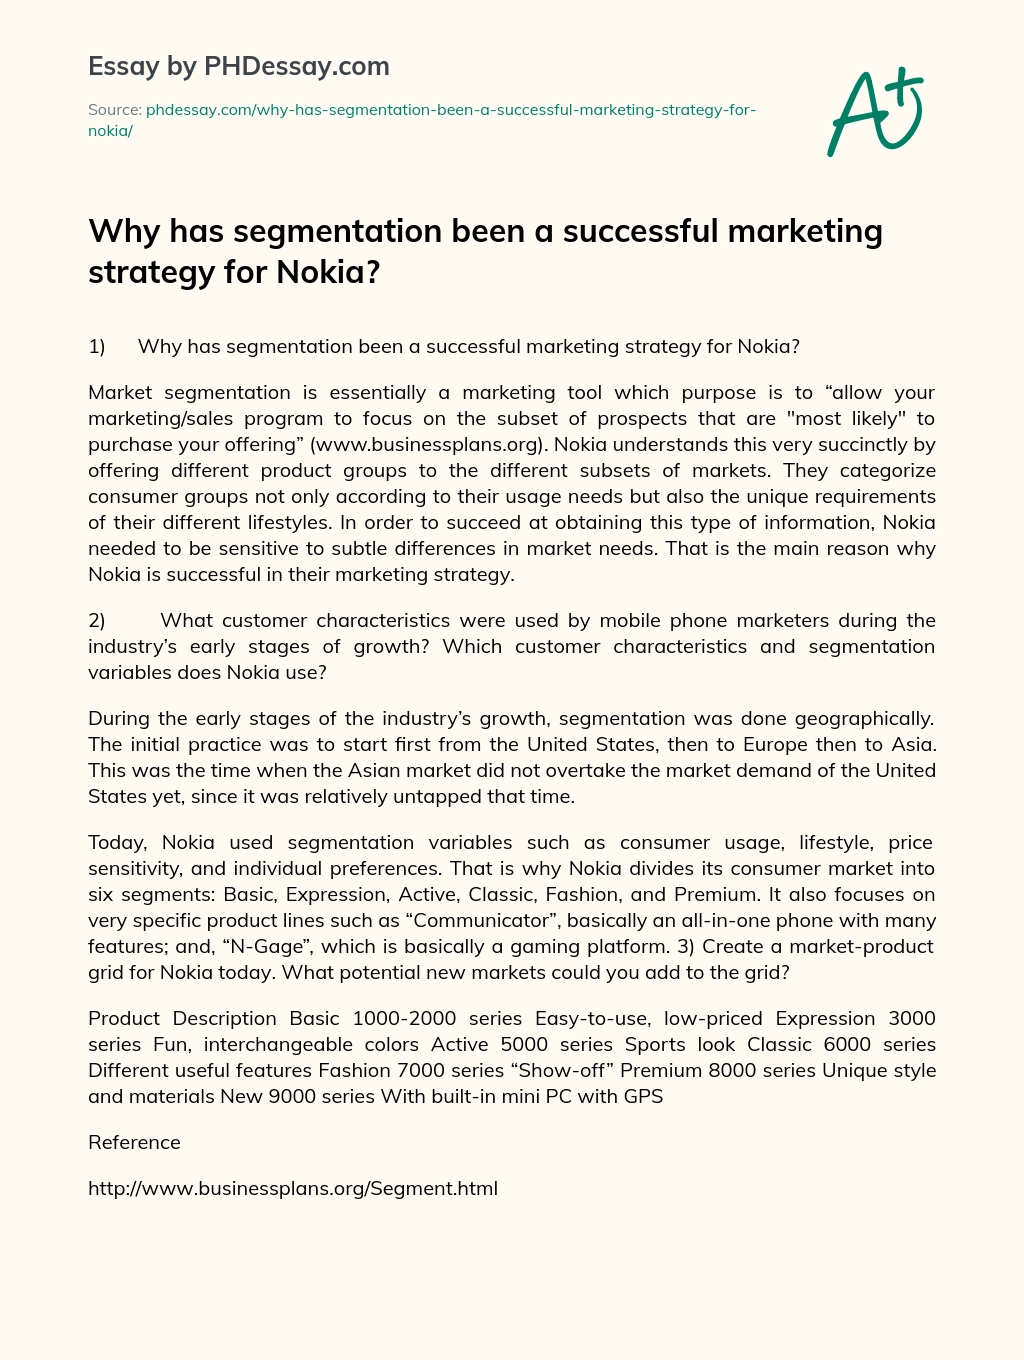 Why has segmentation been a successful marketing strategy for Nokia? essay